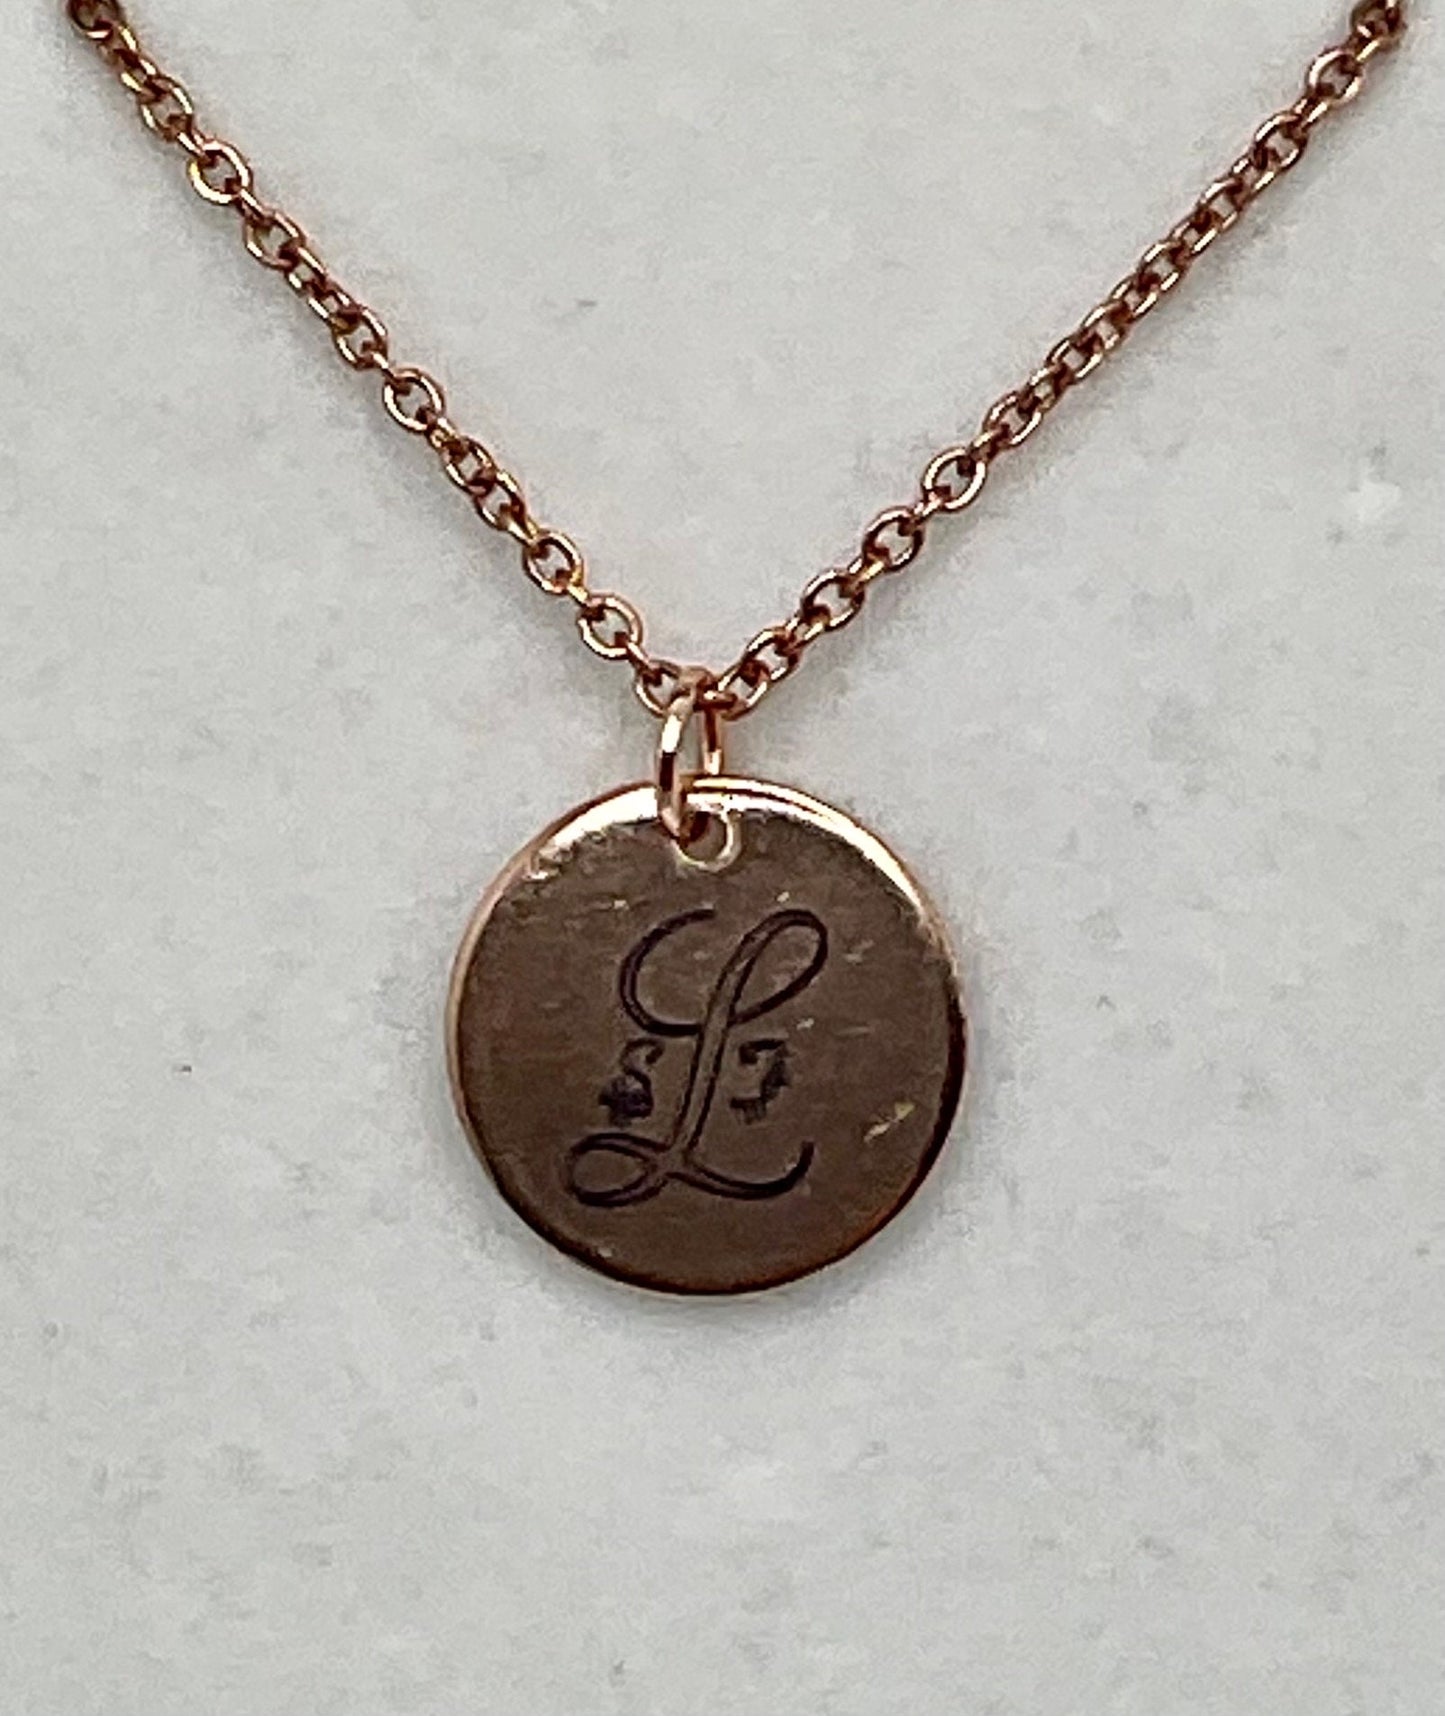 Monogrammed Personalized Rose Gold or Silver Jewelry Charm Necklace